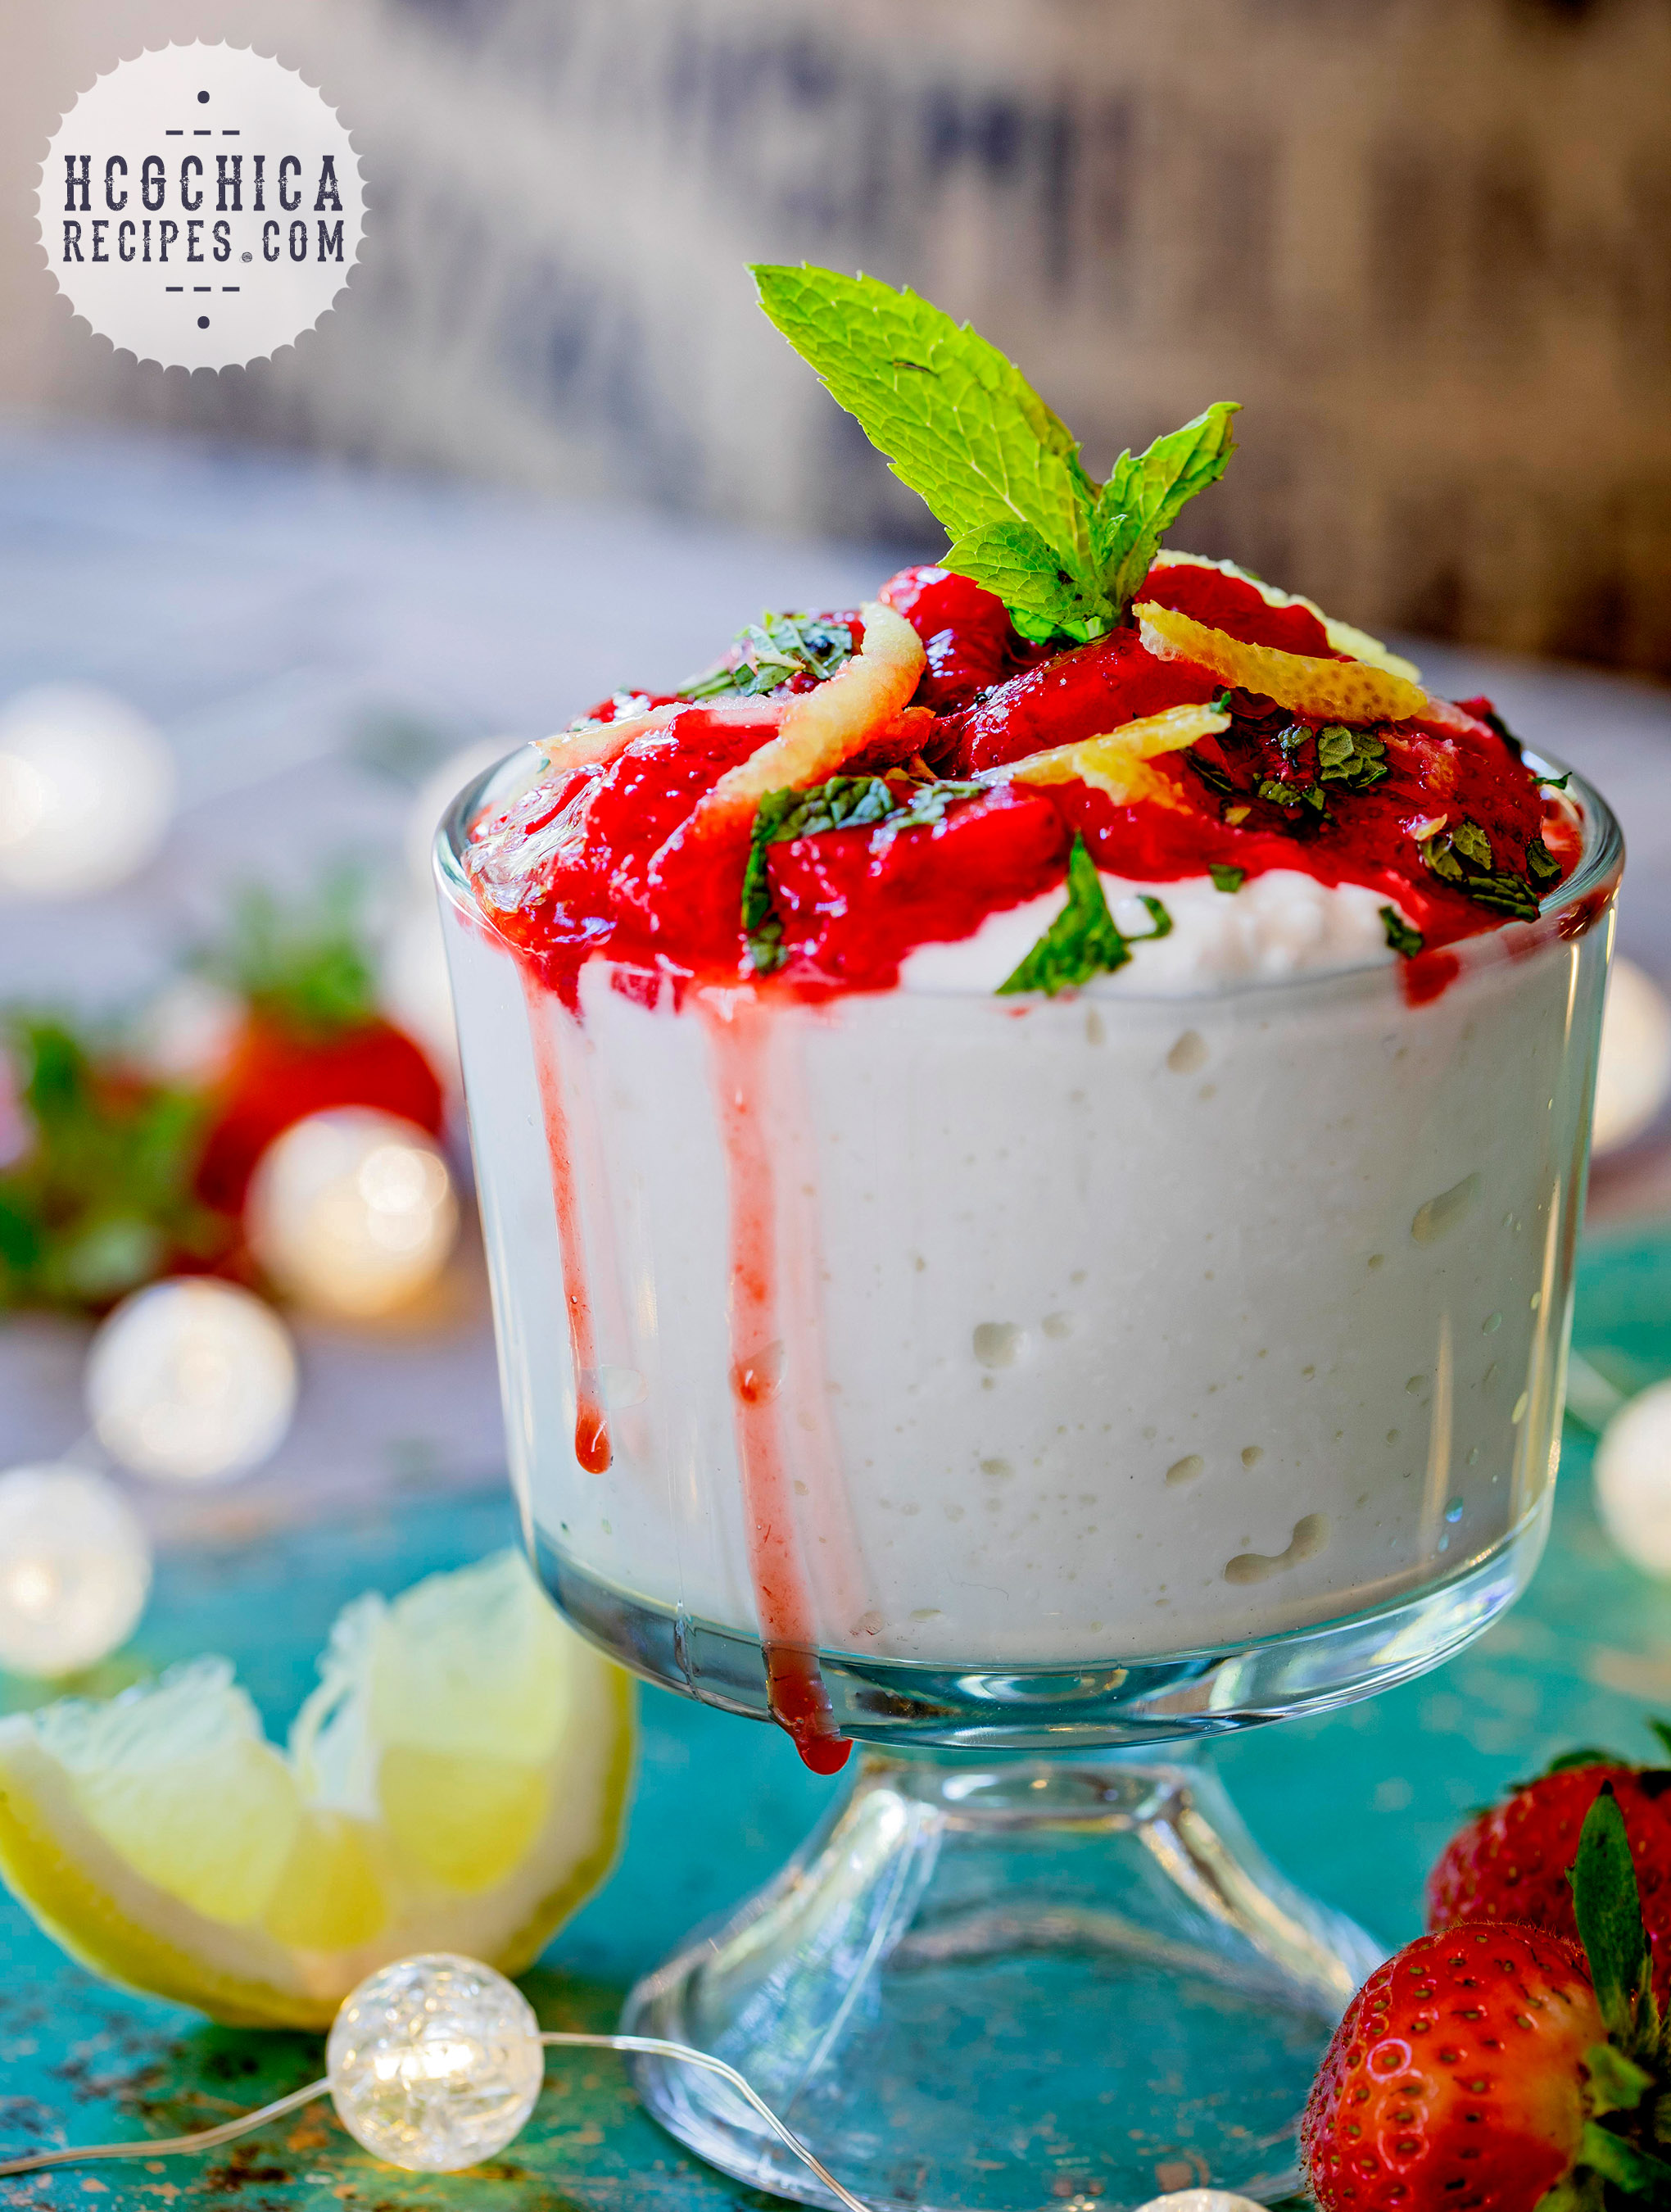 P2 Hcg Diet Protein Fruit Recipe Strawberry Sauce Over Cottage